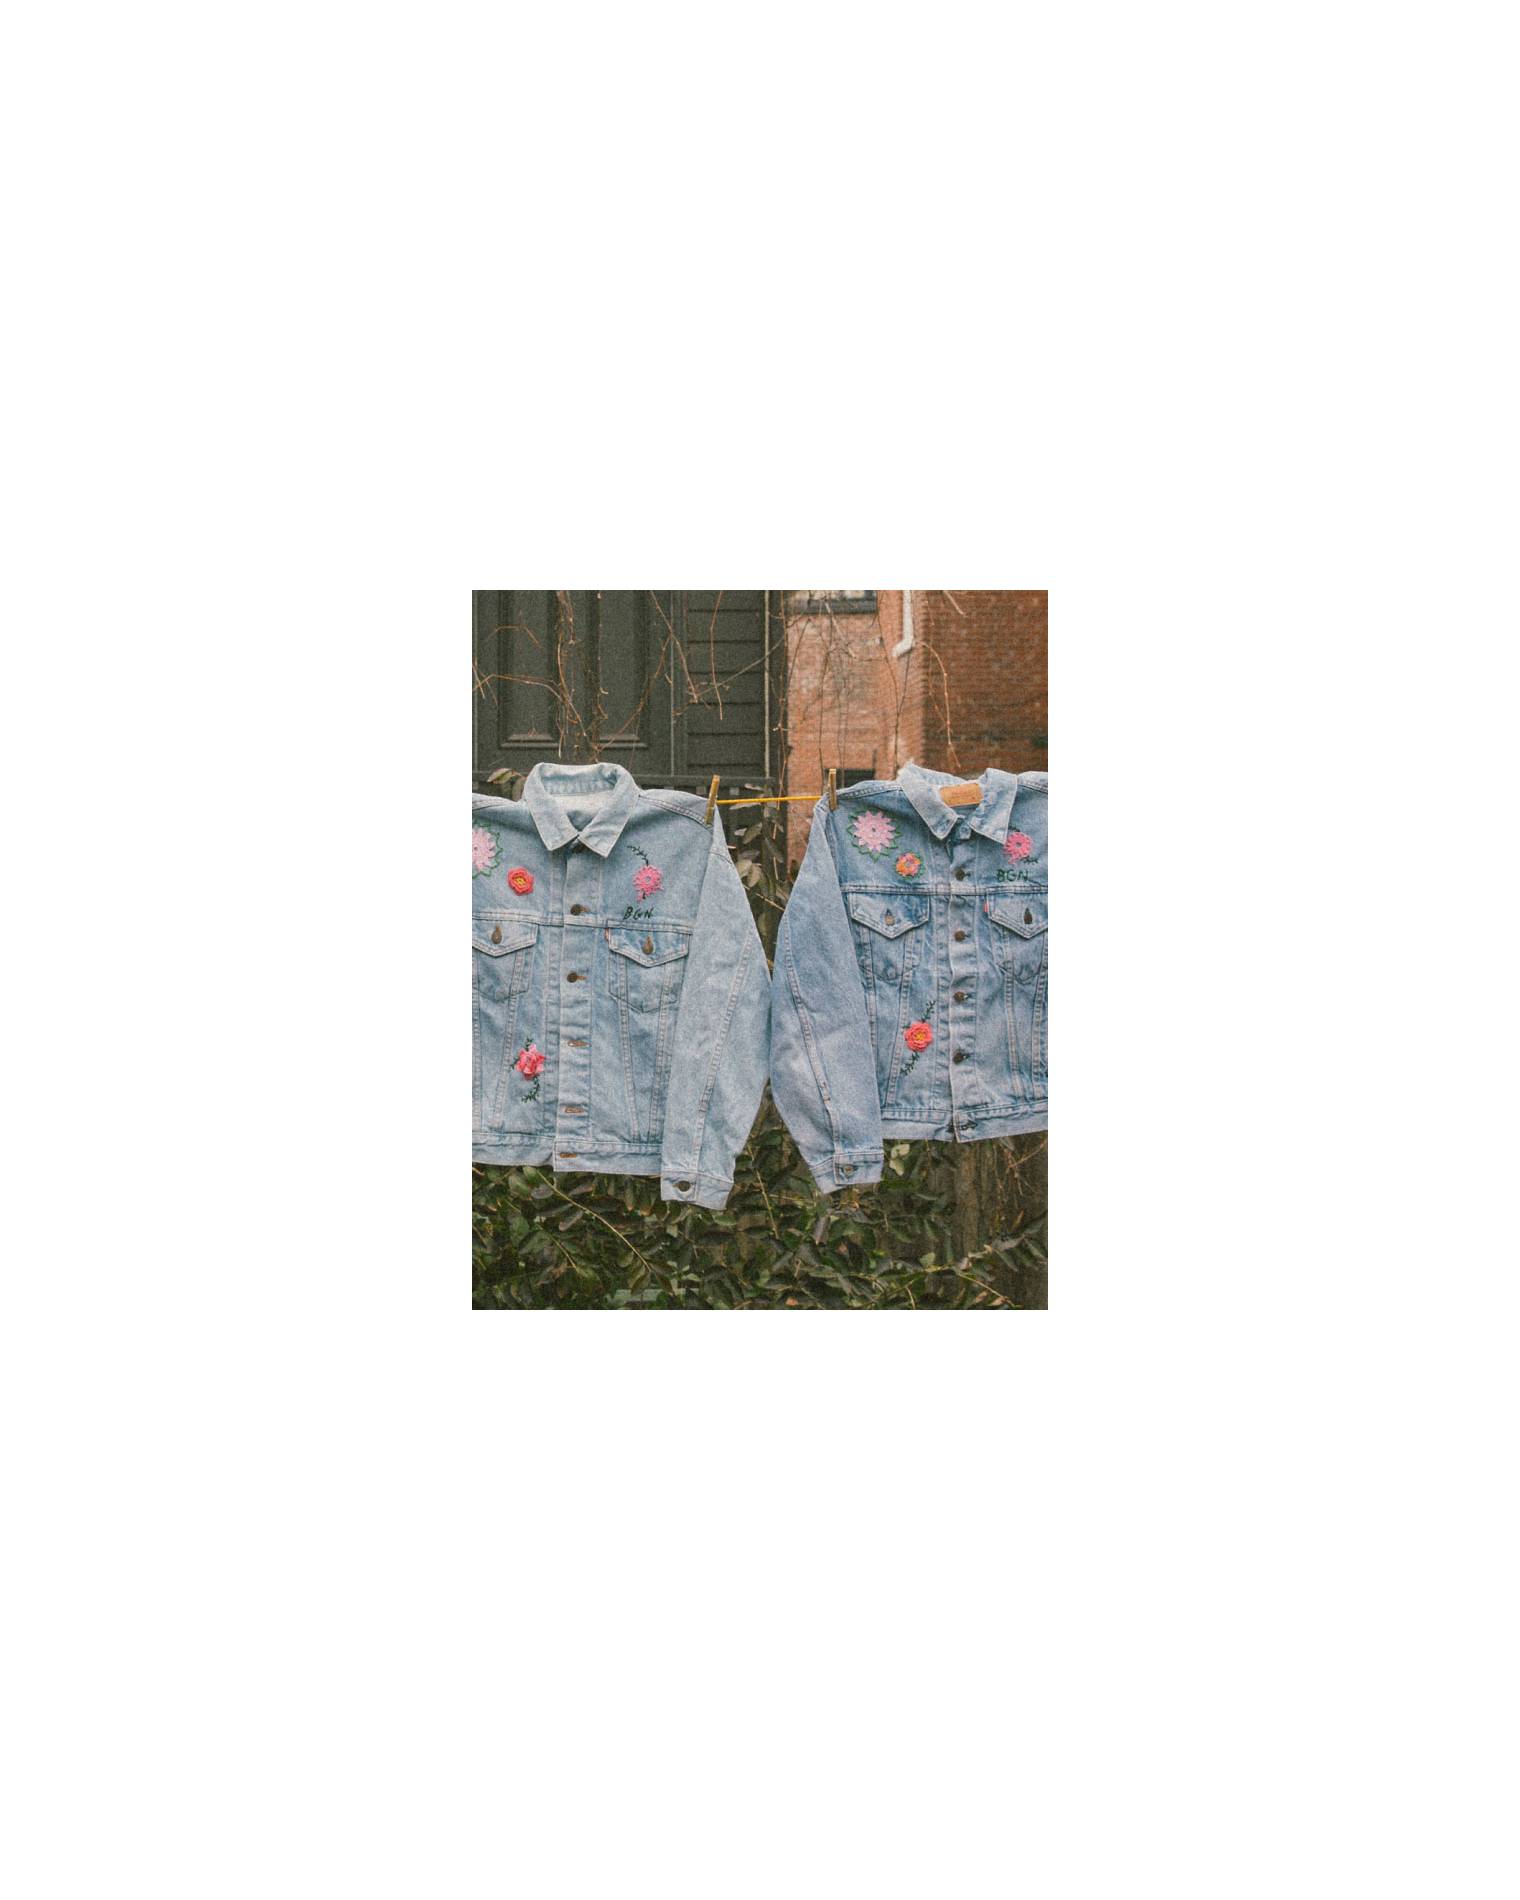 Image of seven customized jean jackets with embroidery by Bentgablenits hanging on a clothesline.